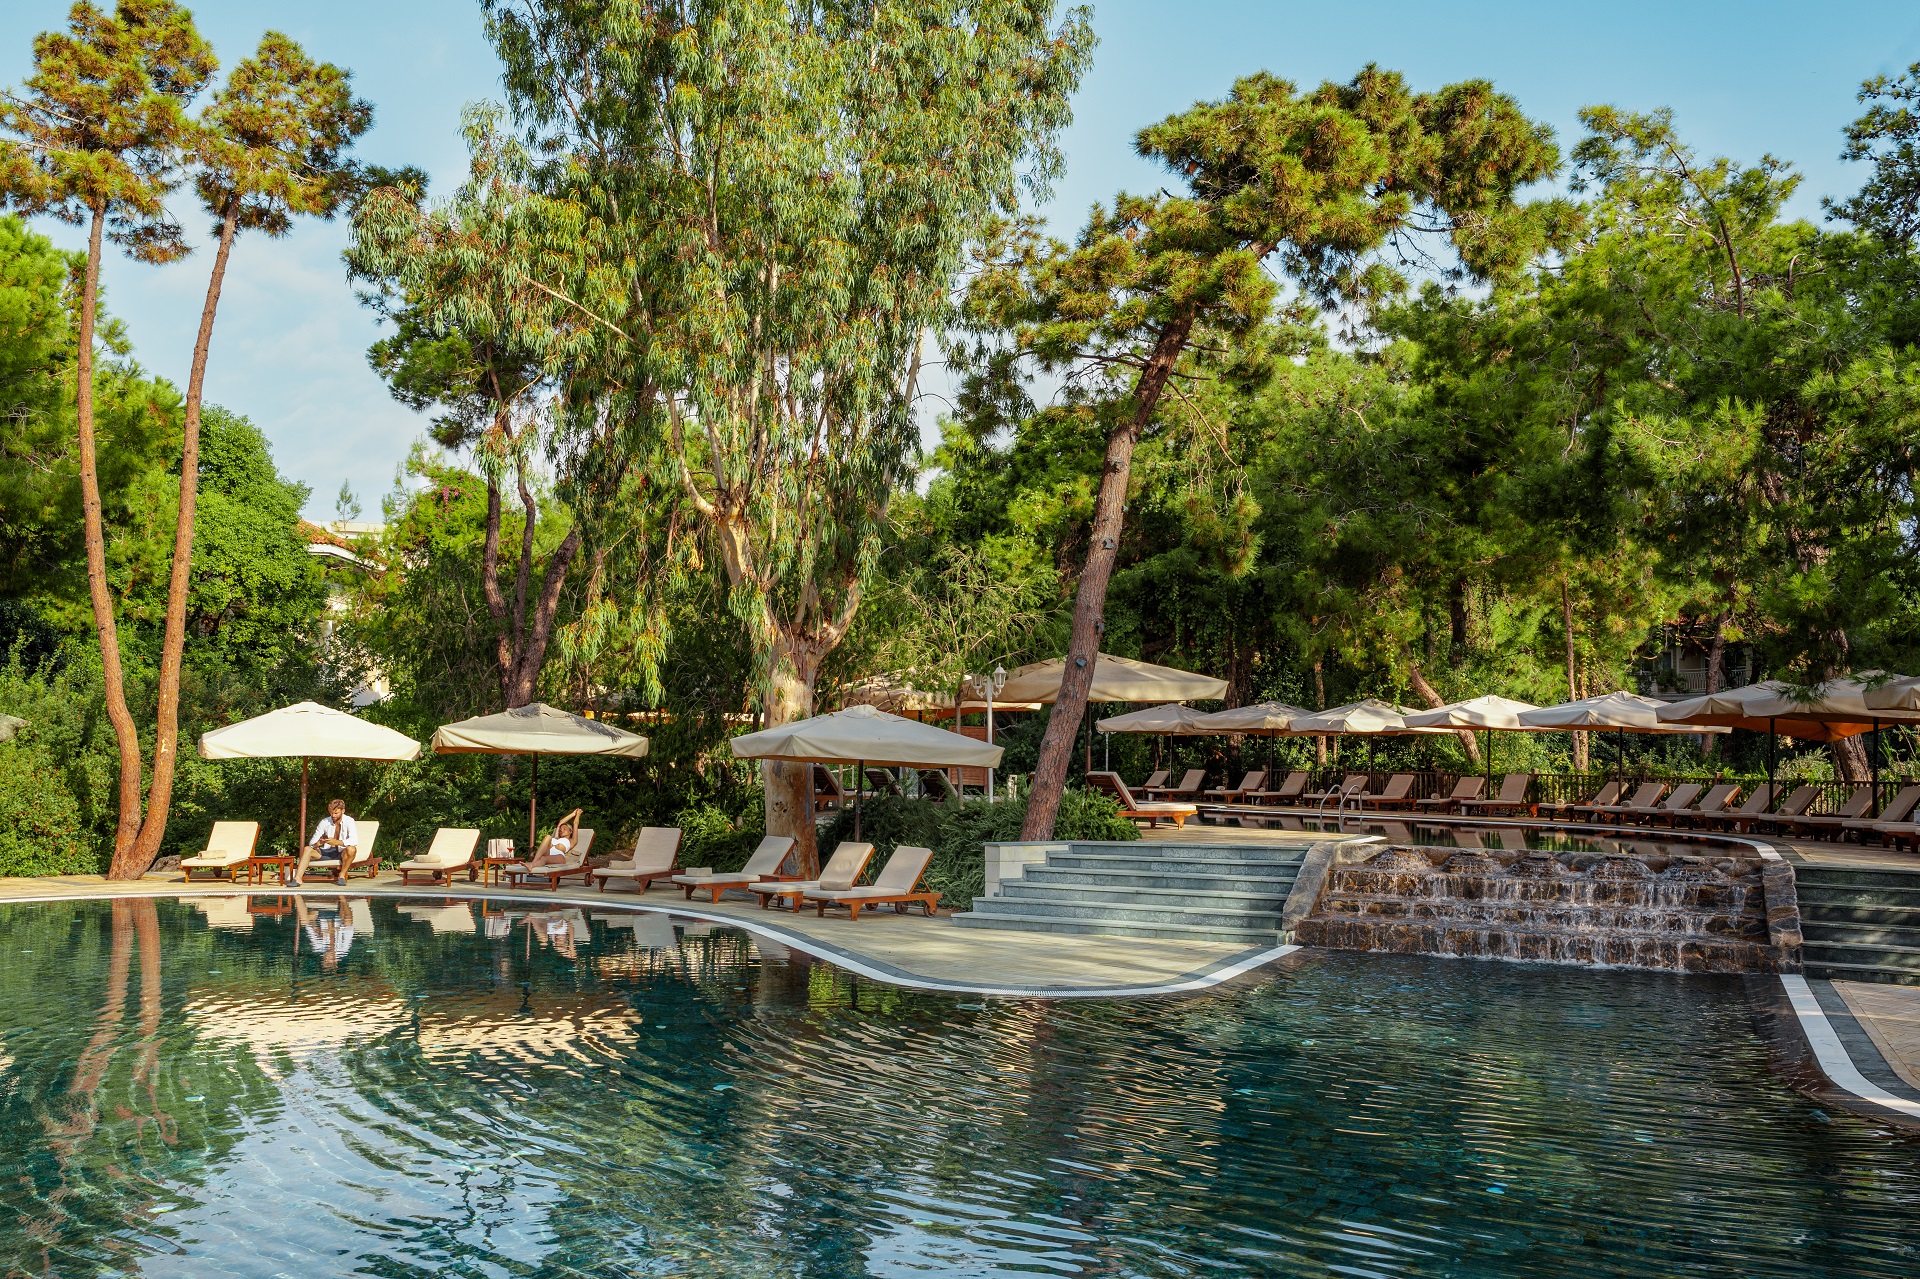 Relax in a tranquil setting away from all the noise, where you can enjoy the Sun and water peacefully. 